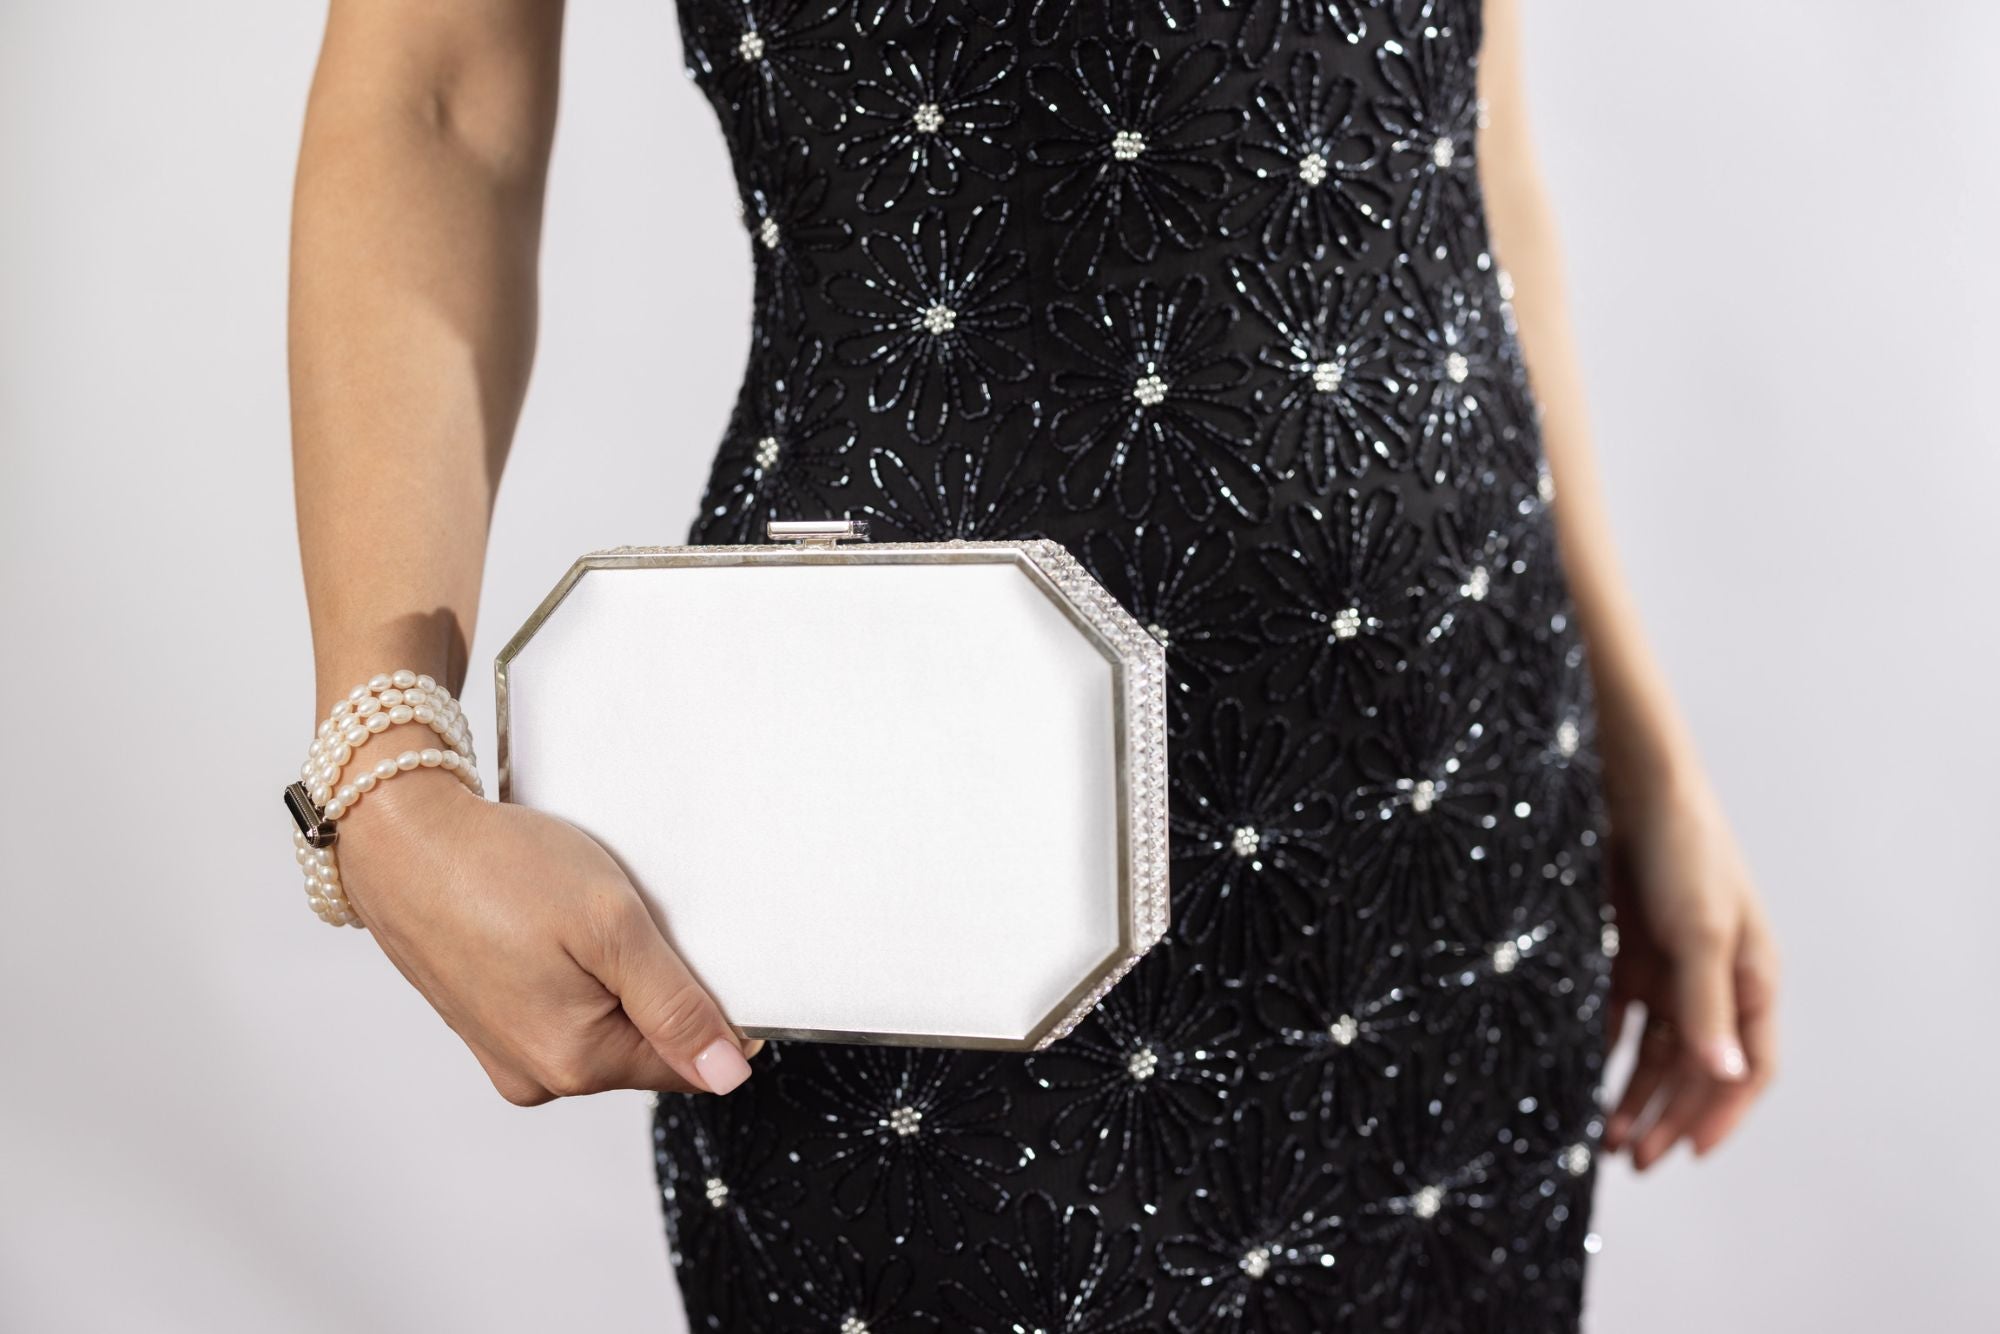 Woman wearing black evening cocktail dress holding white satin Como Clutch.